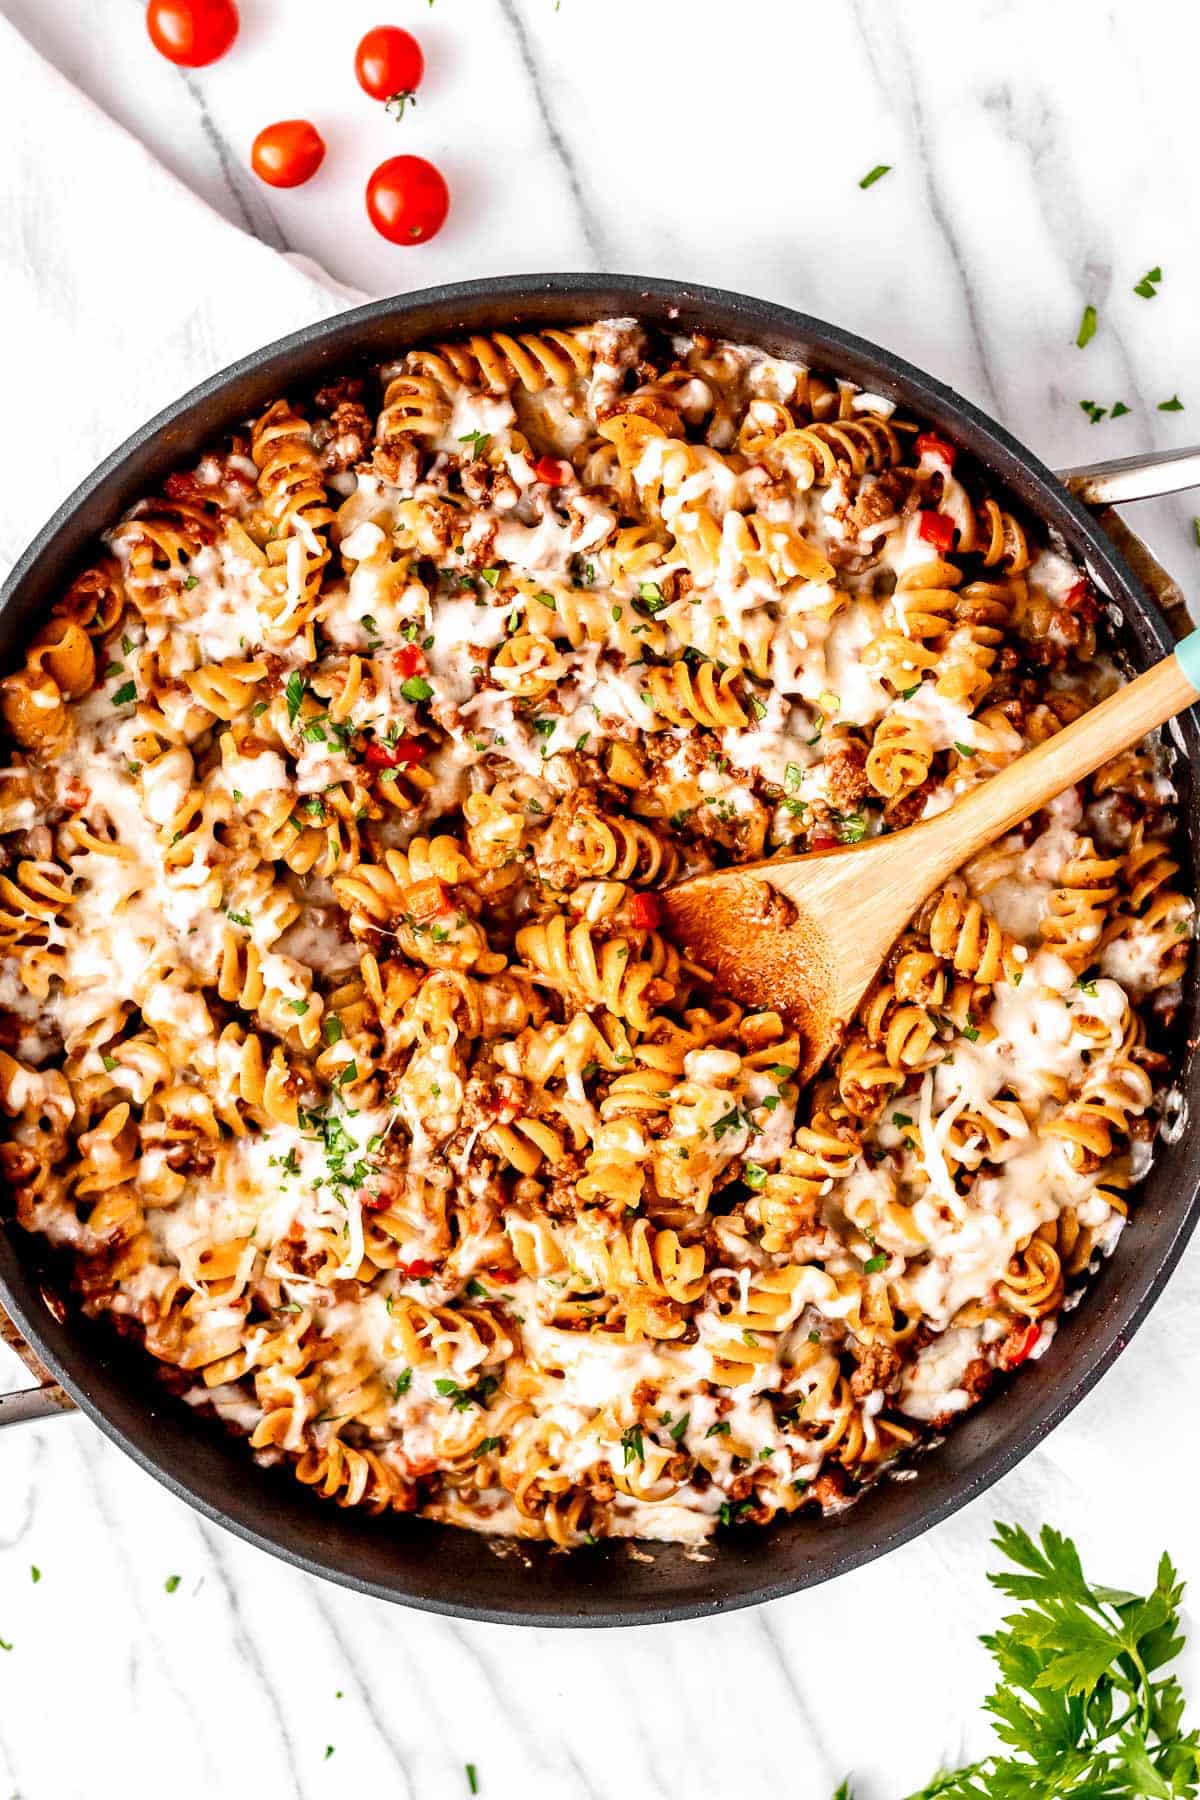 A ground beef pasta skillet on a marble background with tomatoes and parsley around it.